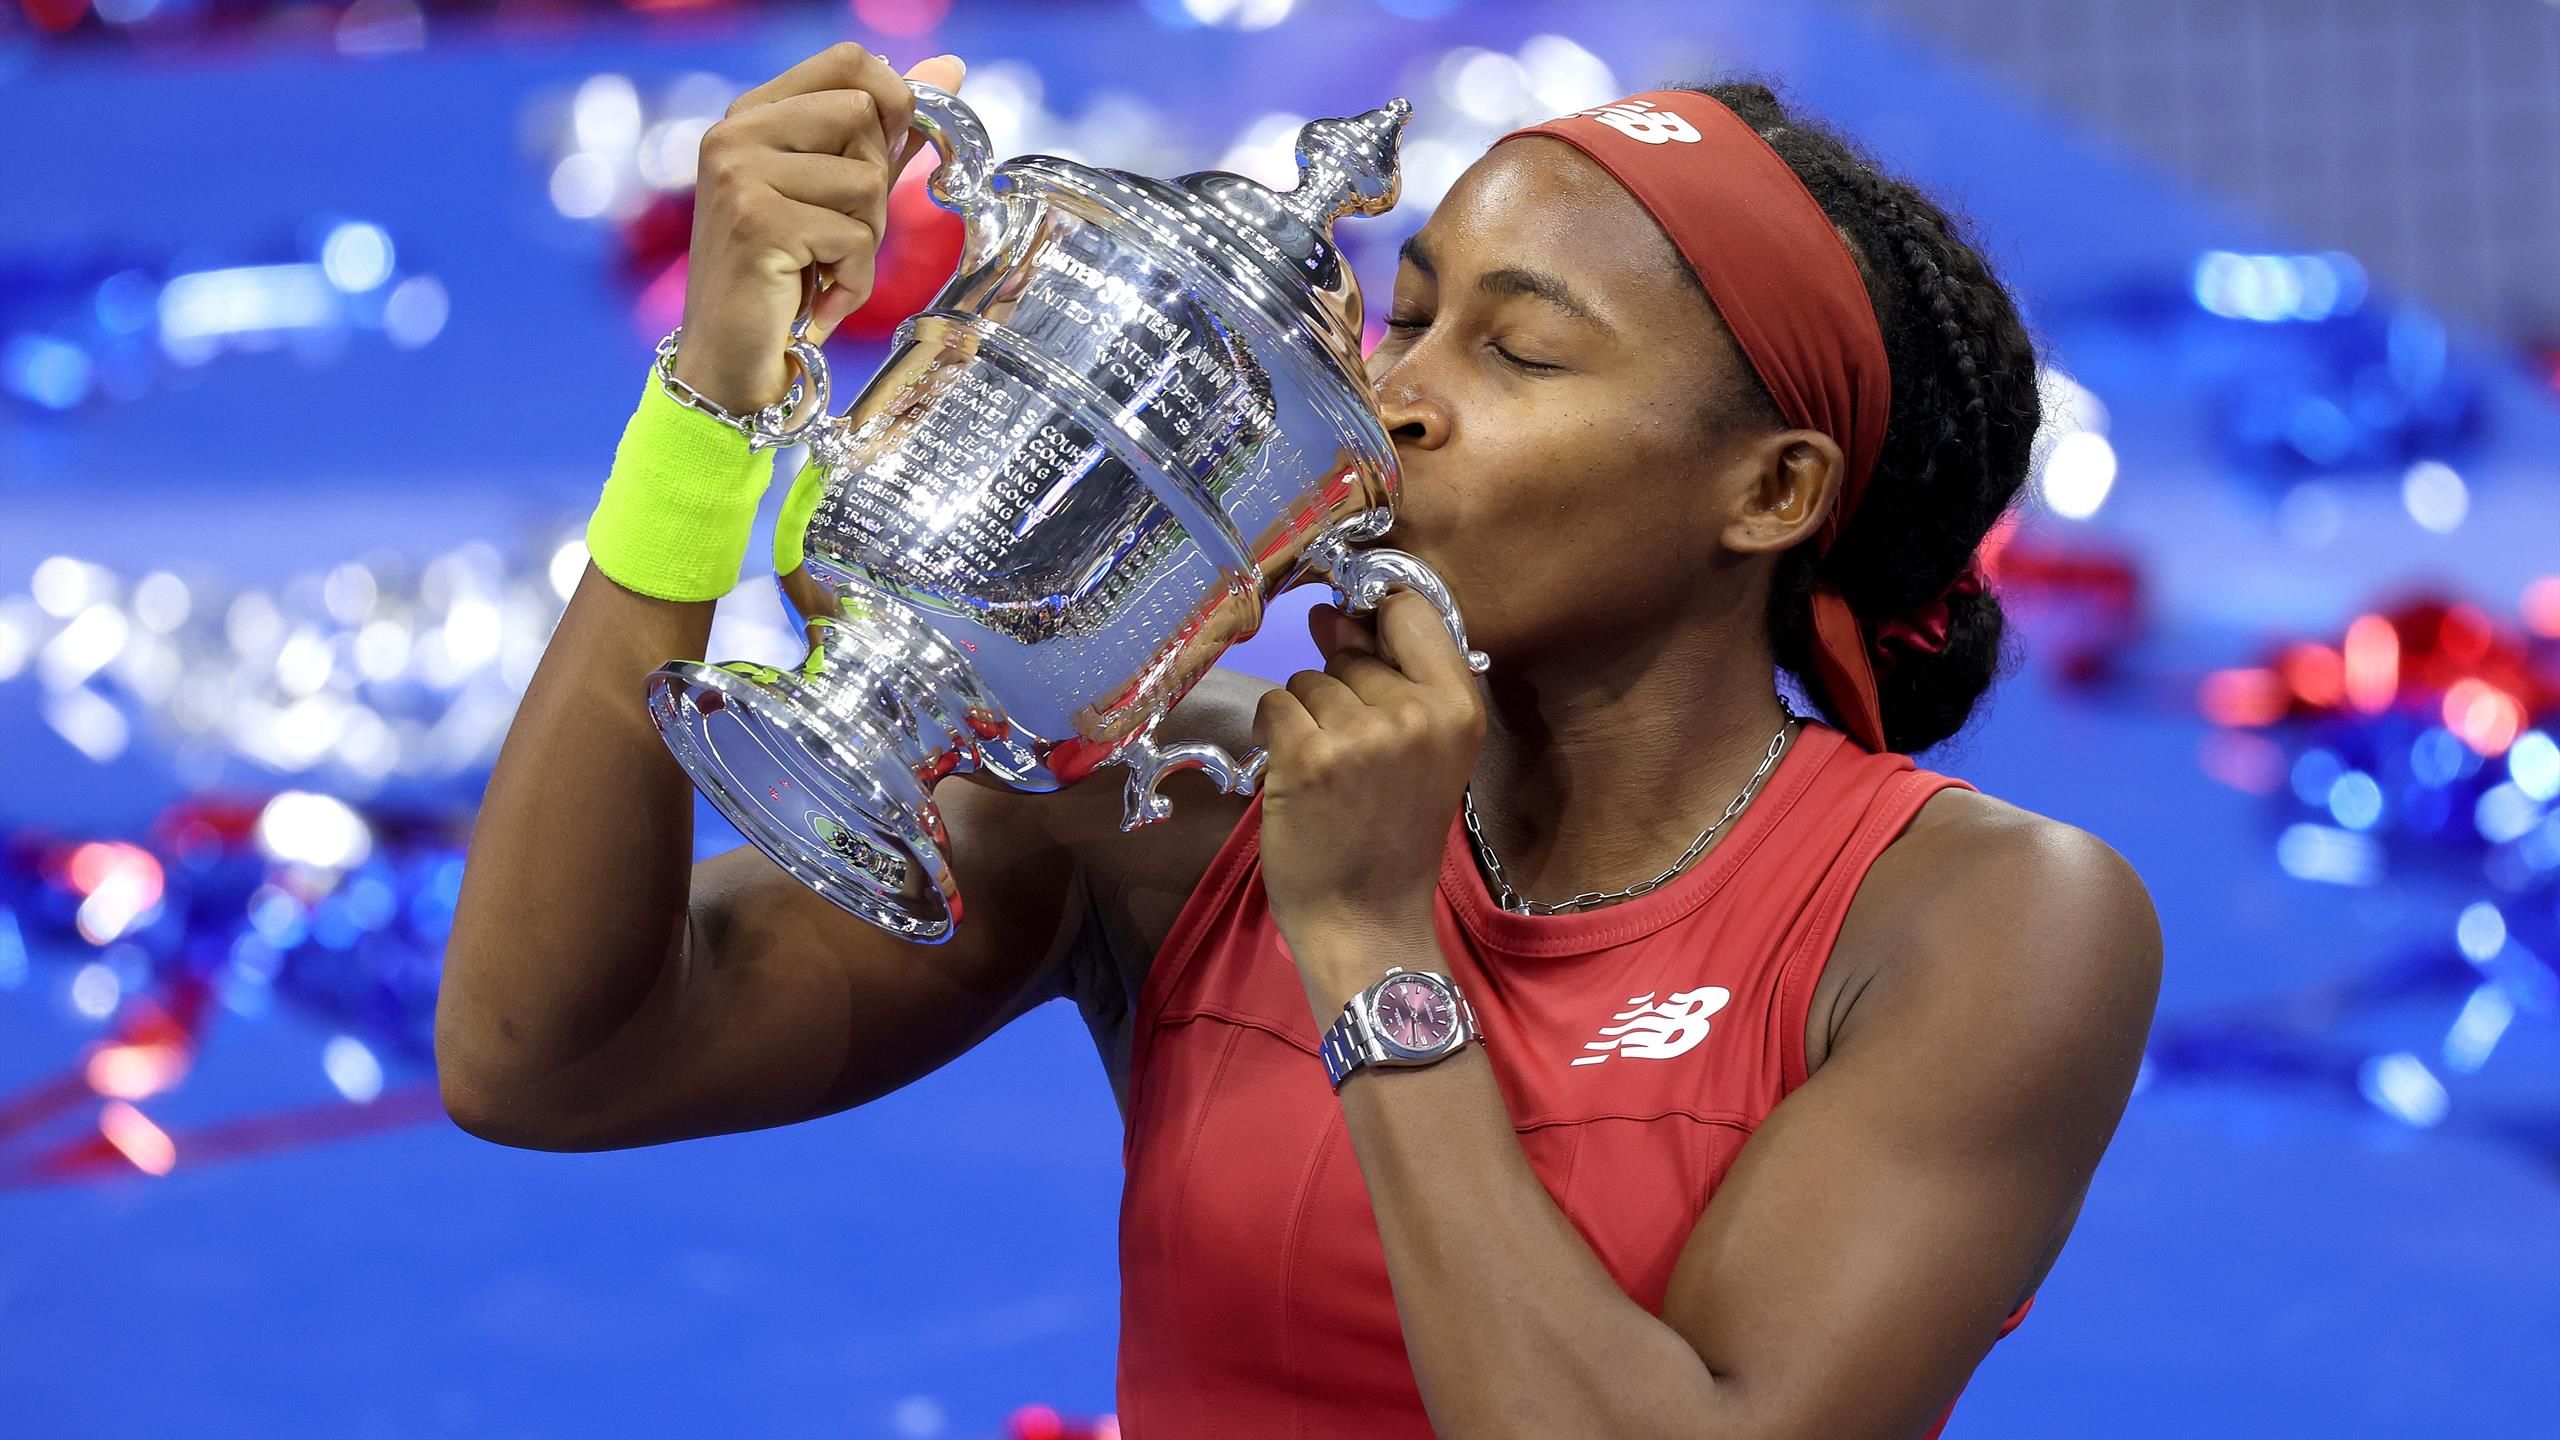 Coco Gauff wins US Open 2023: Sabalenka comes back 2-6, 6-3, 6-2 to win her first tournament